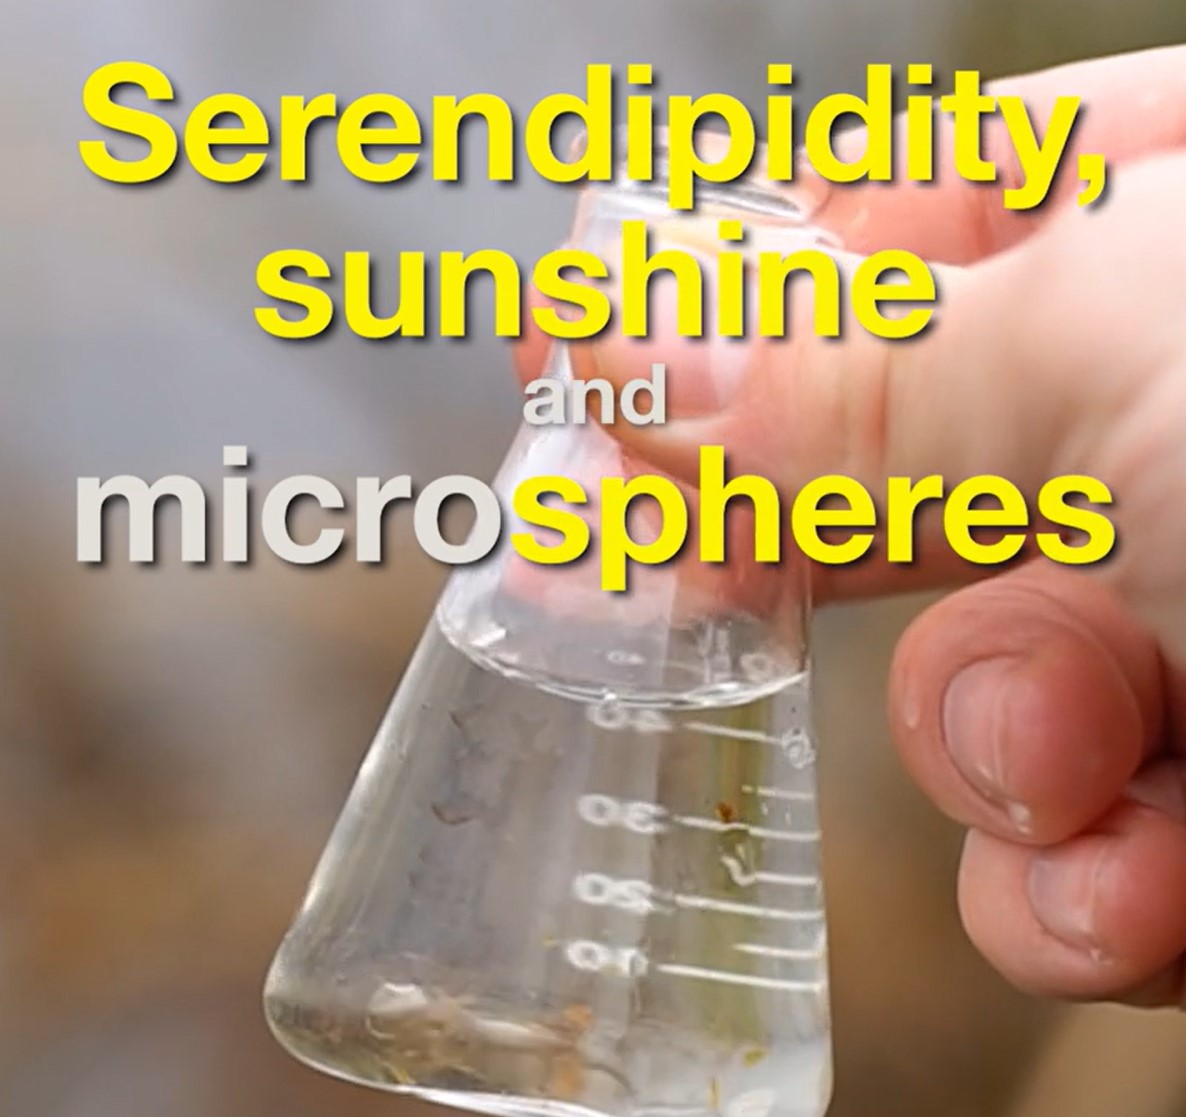 Serendipitous backyard experiment shines light on producing polymers